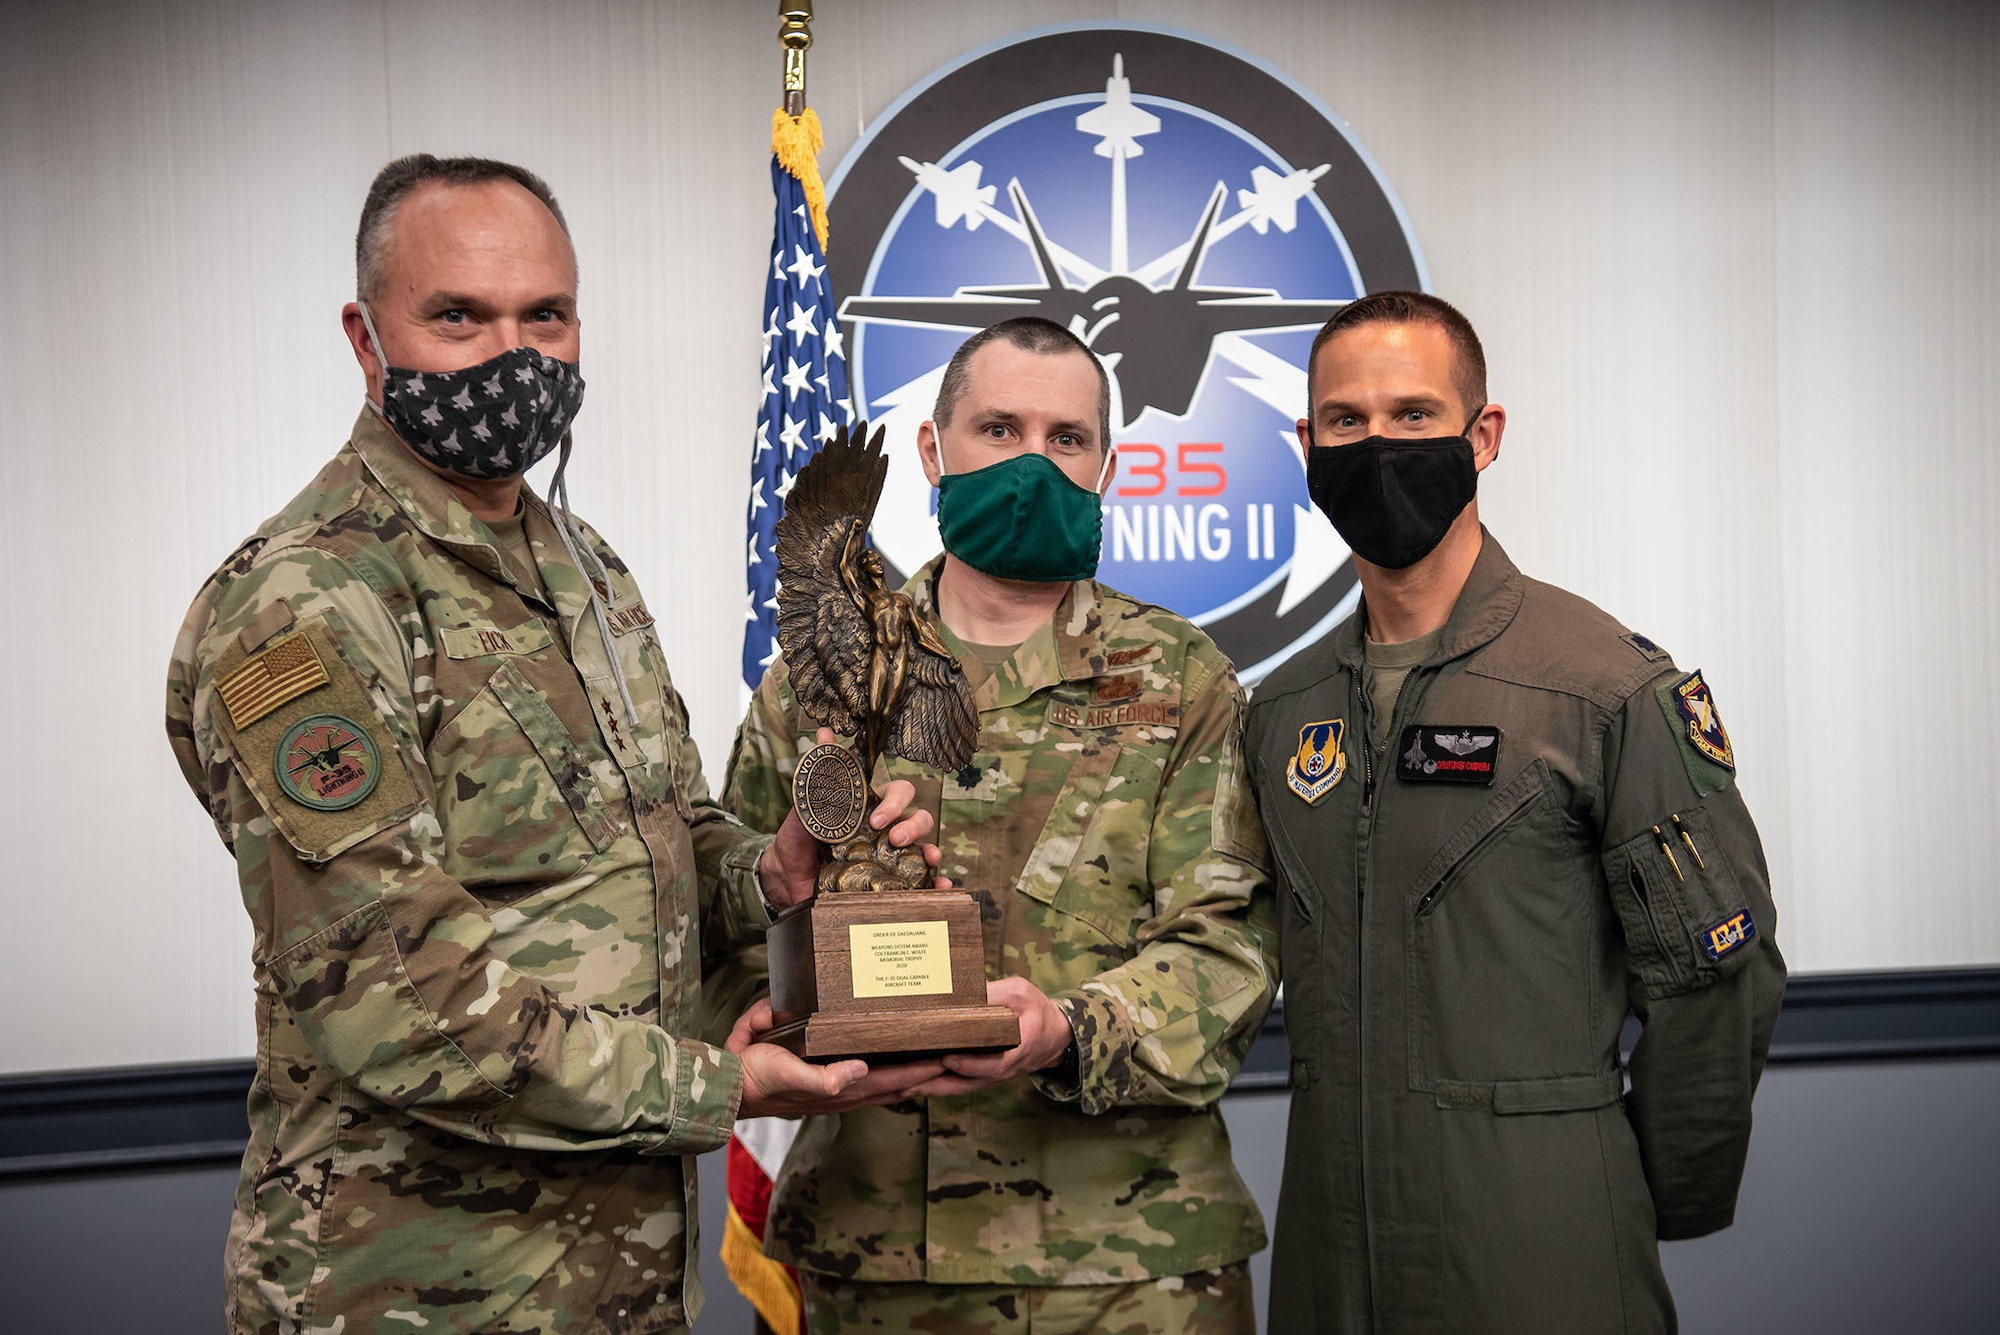 F-35 Joint Program Executive Officer (PEO), Lt. Gen. Eric Fick (far left), presents the prestigious Order of Daedalians Colonel Franklin C. Wolfe Weapons System Award for 2020 to F-35 Dual Capable Aircraft (DCA) Team Materiel Leader Lt. Col. Jason W. Shirley (center) and Commander, 461st Flight Test Squadron/Director, F-35 Integrated Test Force Lt. Col. Christopher “SIN” Campbell (far right). In 2020, the then 26-person F-35 DCA Team completed a vital development test campaign a full year ahead of schedule, which earned them this award. The award is presented annually to military or civilian individuals, groups or an organization determined to have contributed the most outstanding weapons system development which operates, in whole or in part, in the aerospace environment. The F-35 Joint Program Office is the Department of Defense's focal point for the 5th generation strike aircraft for the U.S. Navy, Air Force, and Marine Corps, as well as for our International Partners and Foreign Military Sales Customers. The F-35 is the premier multi-mission, 5th generation weapon system. Its ability to collect, analyze and share data is a force multiplier that enhances all assets in the battle-space: with stealth technology, advanced sensors, weapons capacity, and range. The F-35, which has been operational since July of 2015, is the most survivable, and interoperable fighter aircraft ever built. (Photo by America Henry-Wingo)